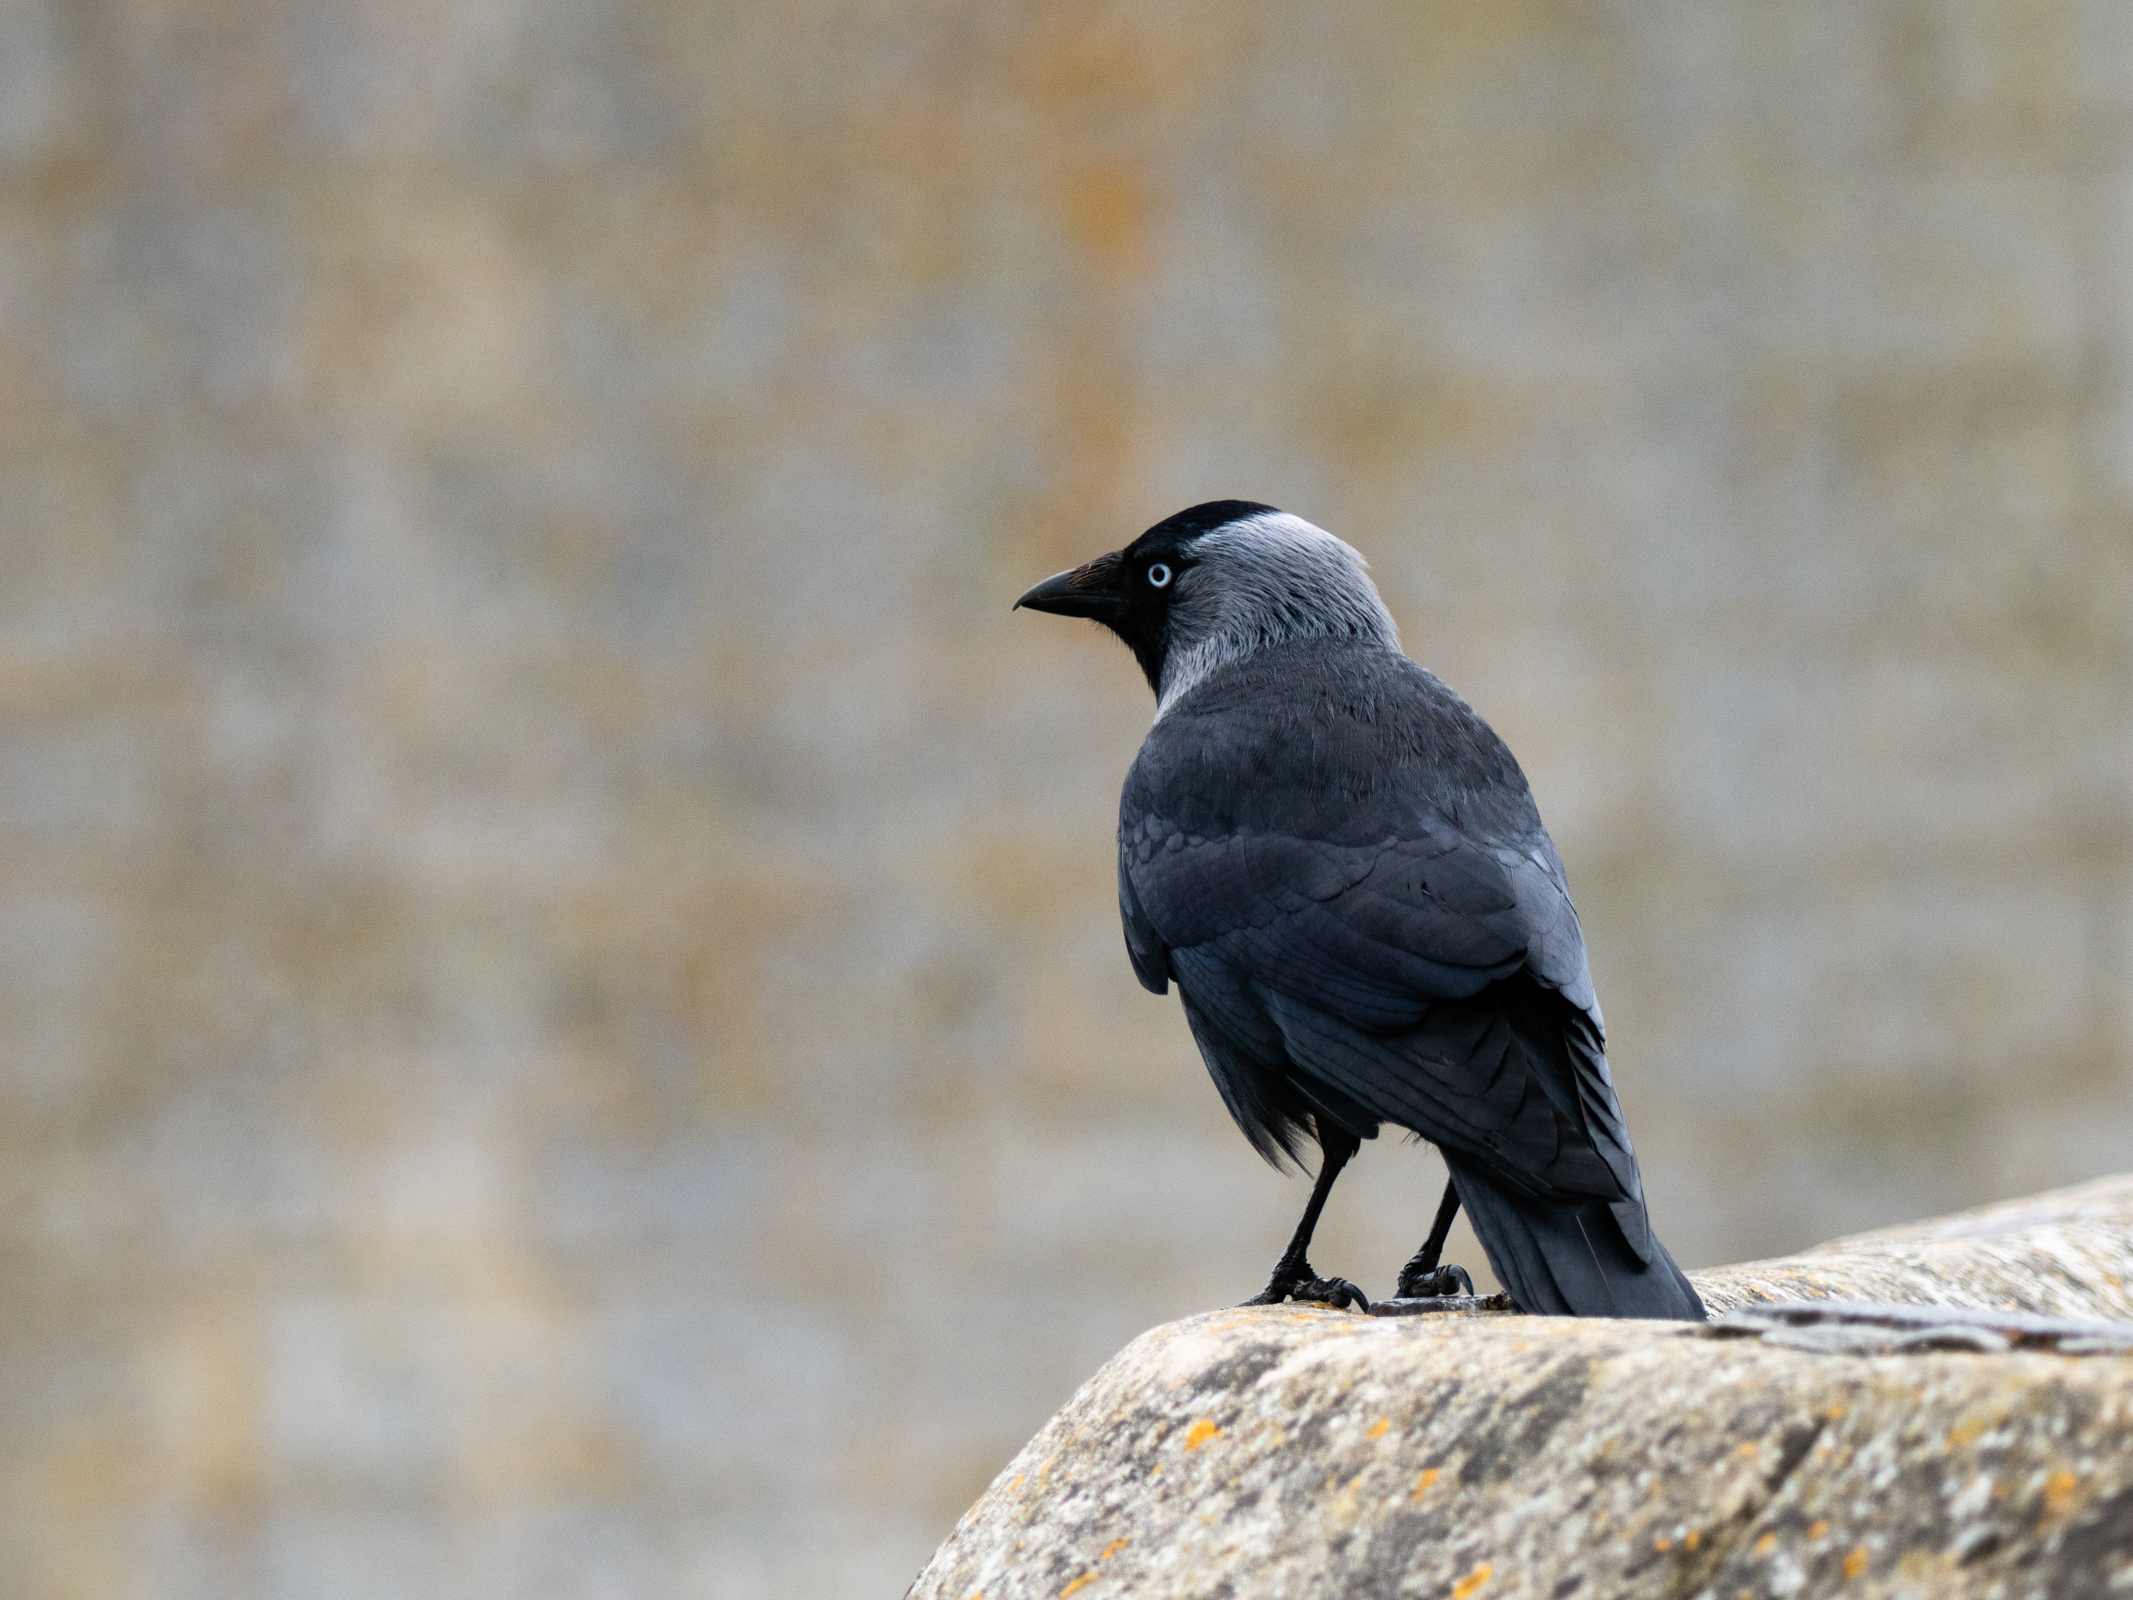 Photo of a jackdaw taken with the OM System M.Zuiko Digital 150-600mm F5.0-6.3 IS